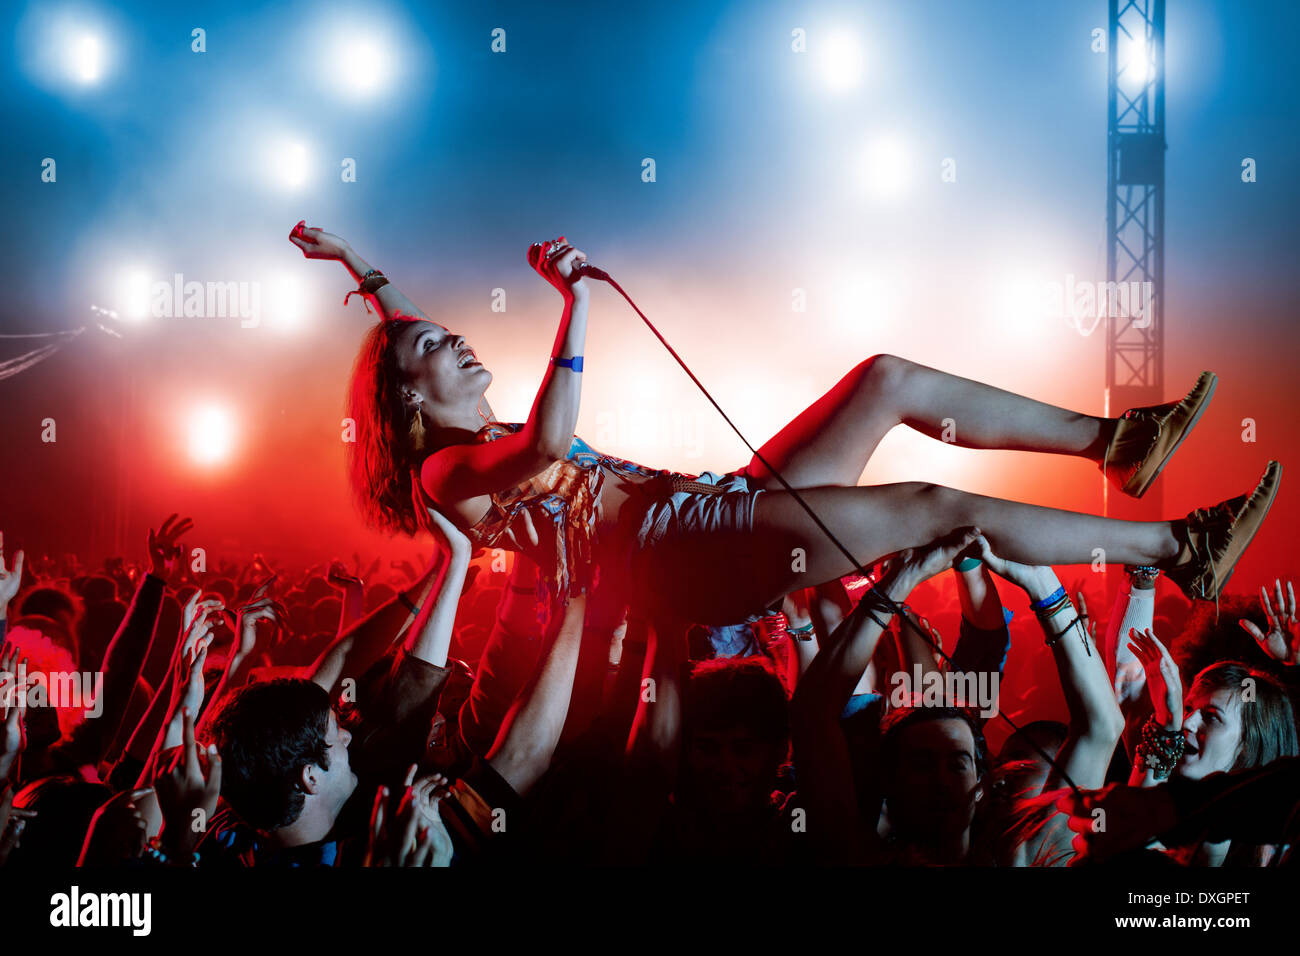 Performer crowd surfing at music festival Stock Photo